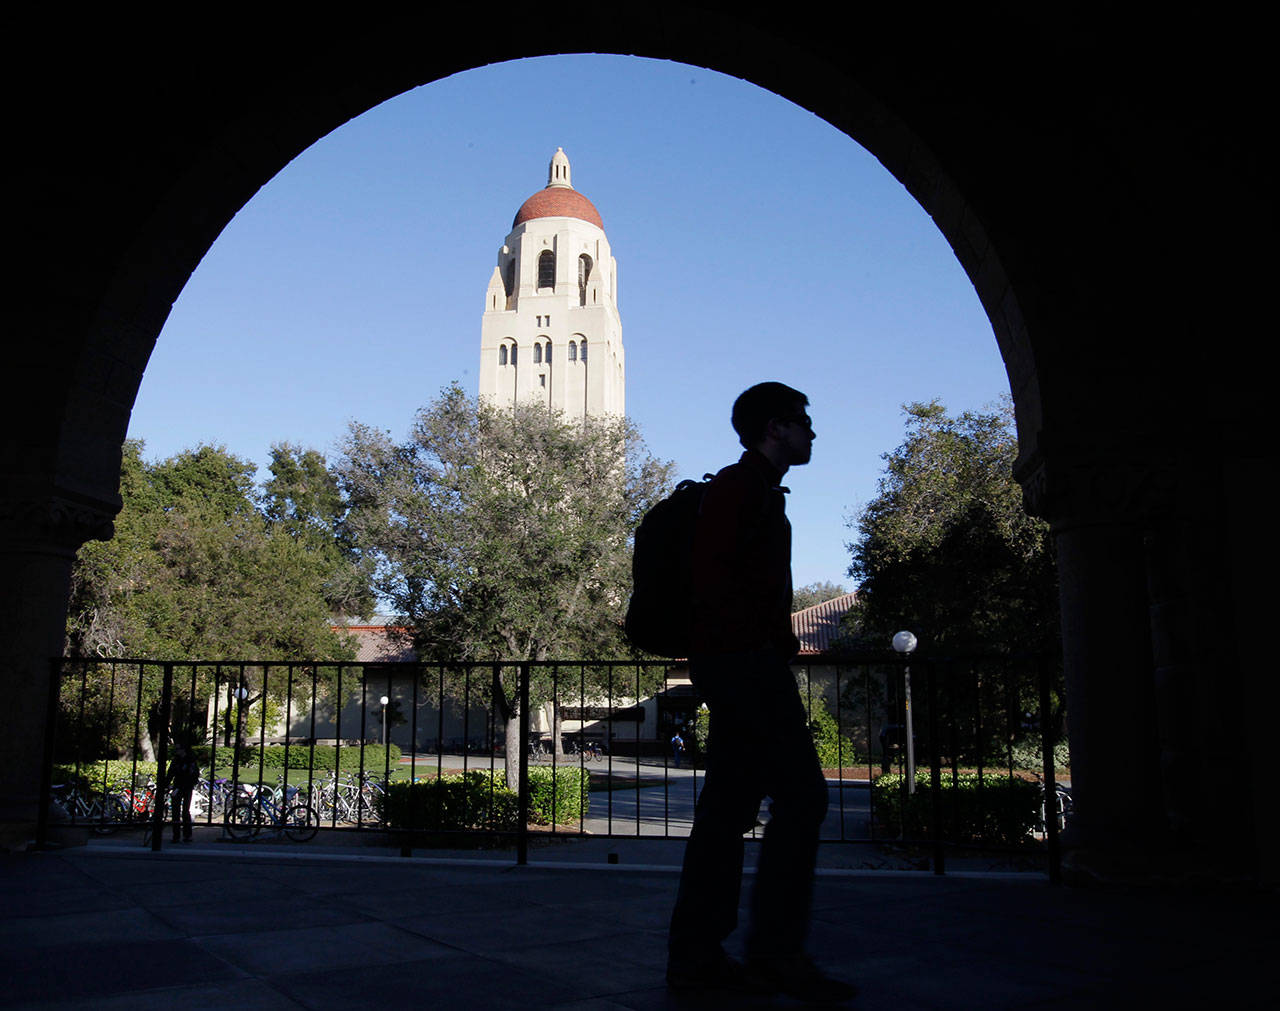 A Stanford University student walks in front of Hoover Tower on the Stanford University campus in Palo Alto, California in February, 2012. Federal authorities have charged college coaches and others in a sweeping admissions bribery case in federal court. The racketeering conspiracy charges were unsealed March 12, against coaches at schools including Stanford, Wake Forest, Georgetown, the University of Southern California and the University of Southern California and University of California, Los Angeles. (Paul Sakuma / Associated Press)